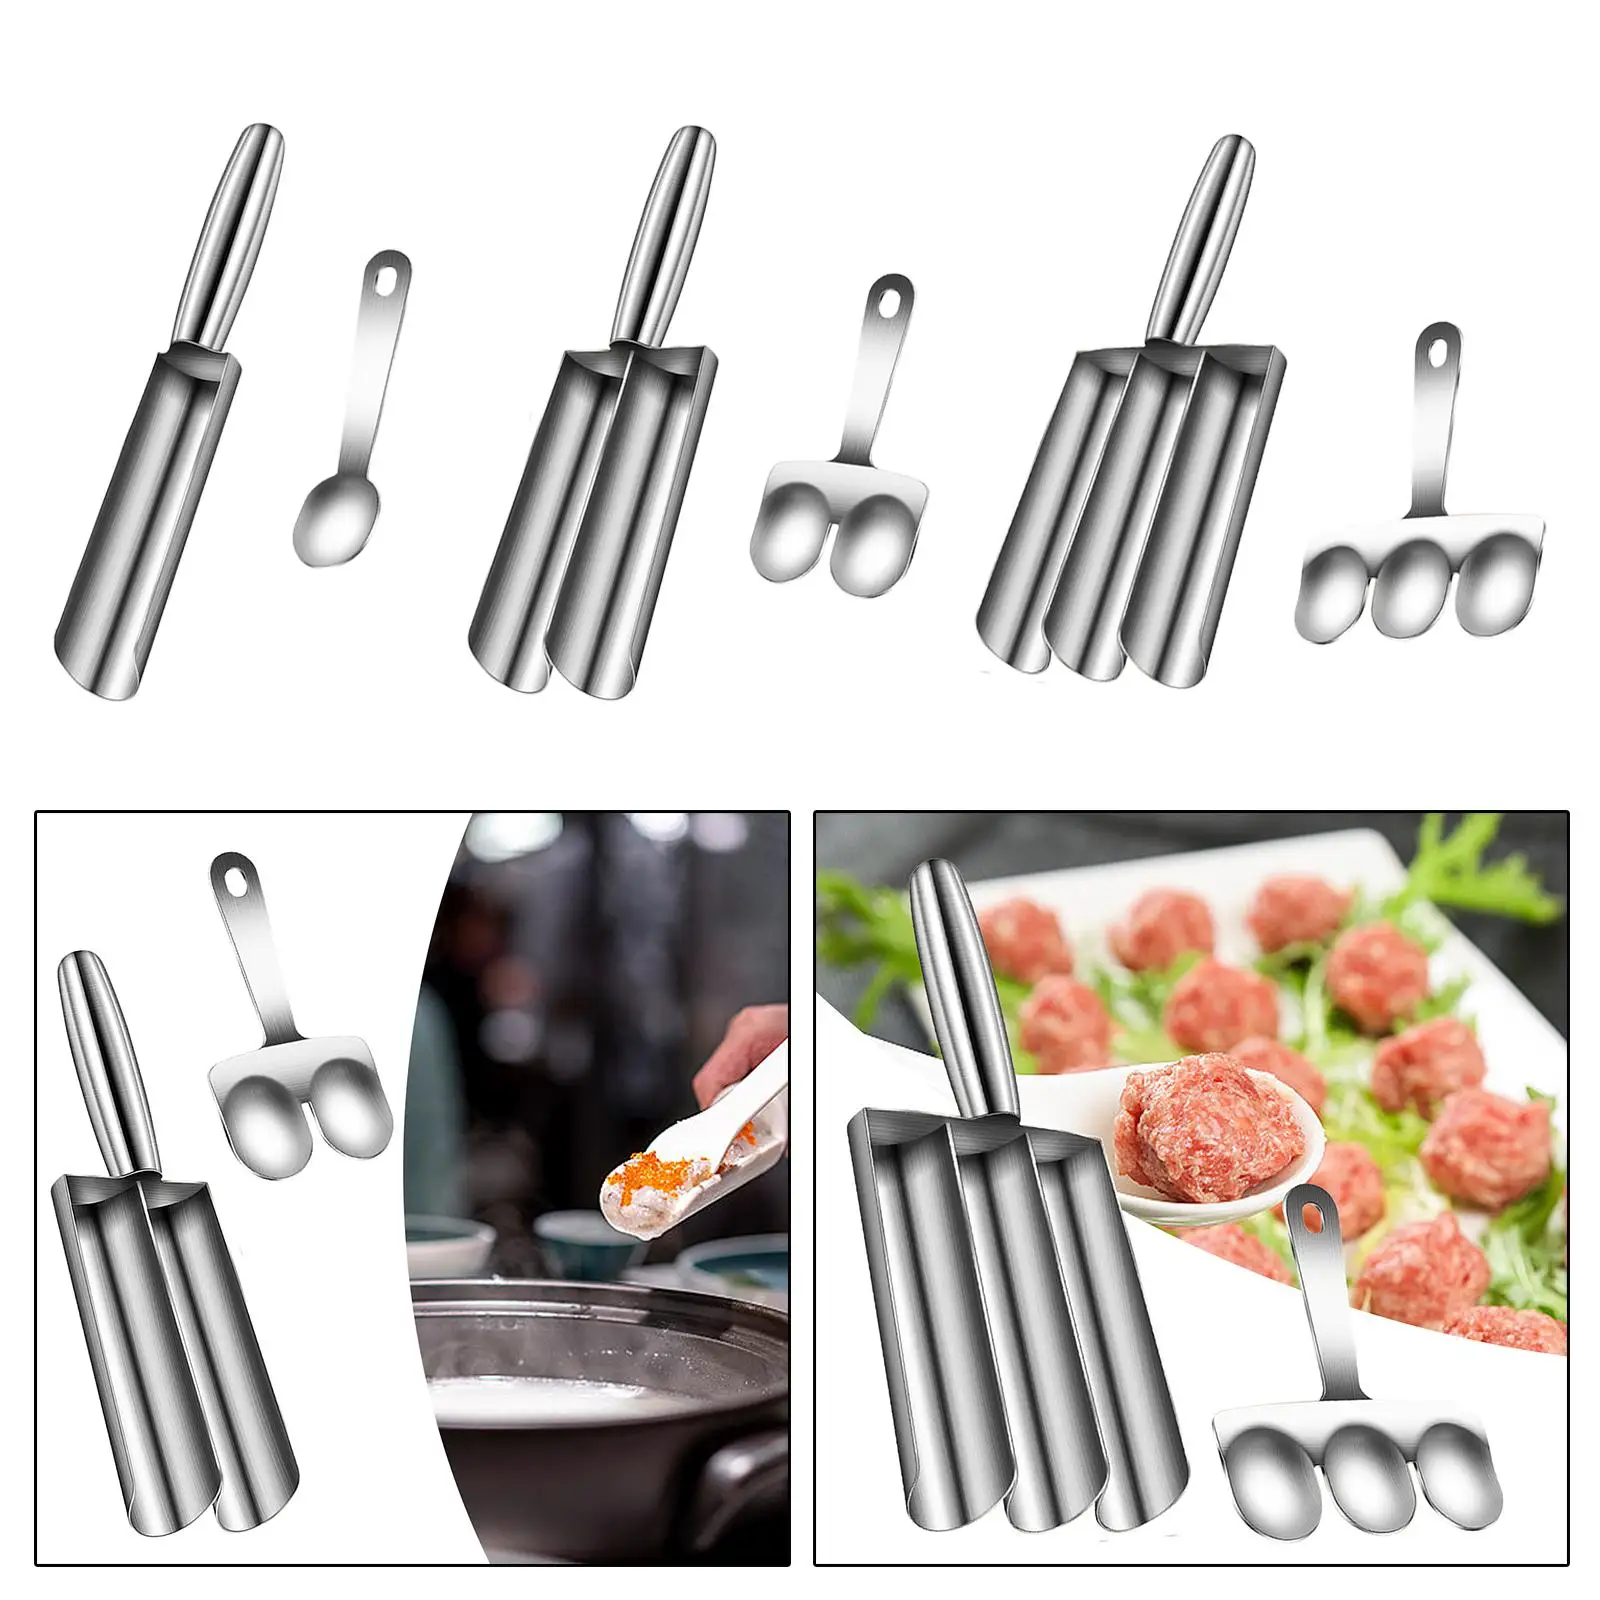 Creative meatball making tool, spoon, meat tools, household kitchen gadgets